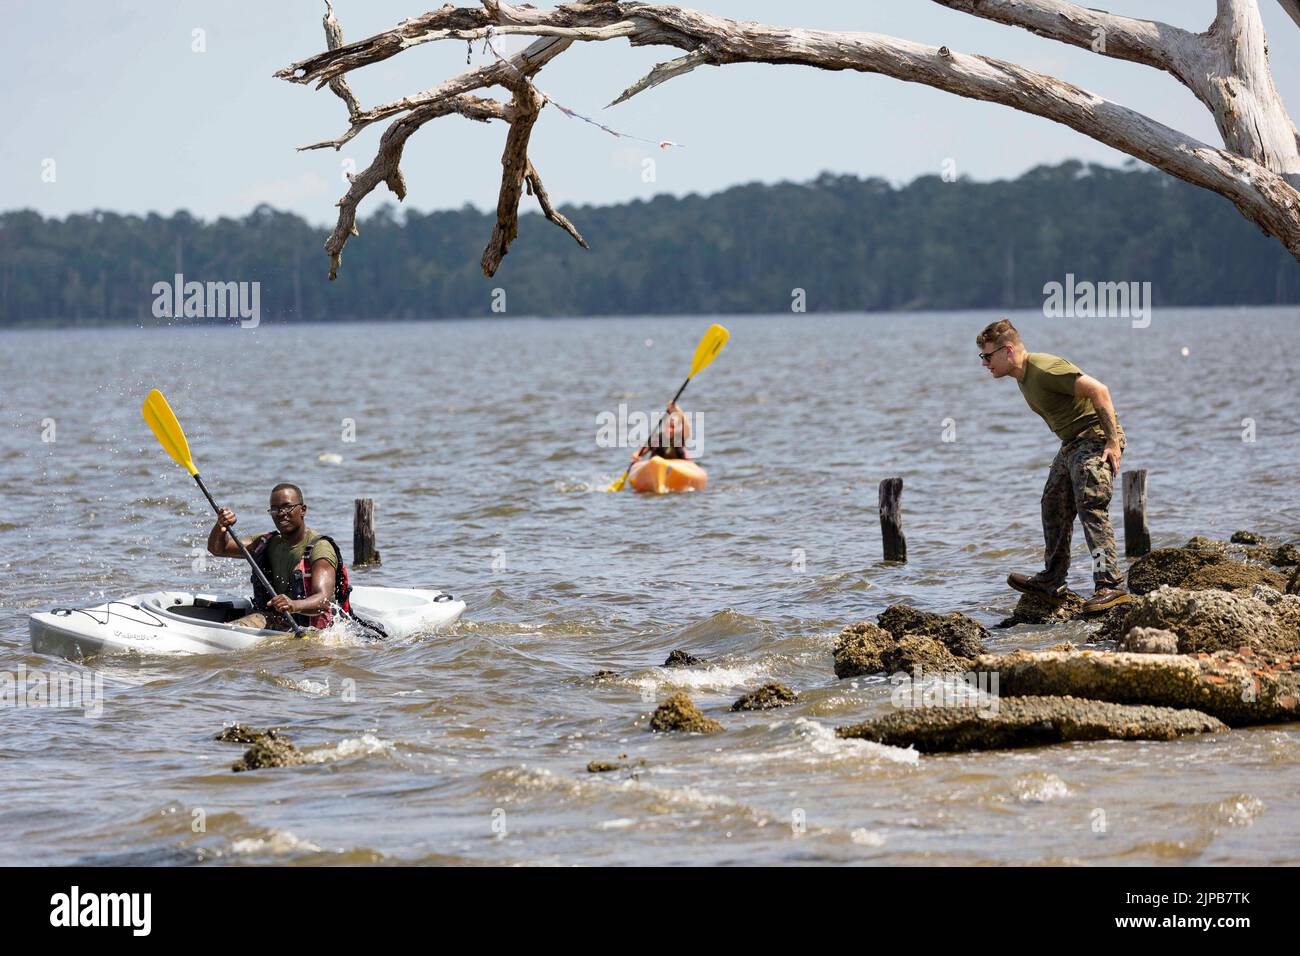 Camp Lejeune, North Carolina, USA. 29th July, 2022. Marines and sailors with the 26th Marine Expeditionary Unit compete in a kayak race during a field meet at Camp Lejeune, N.C. June 29, 2022. The field meet was hosted to build unit cohesion and camaraderie. Other events included a tug of war, vehicle push, combat fitness test relay, and volleyball. The physical activities were followed by a family day. Credit: U.S. Marines/ZUMA Press Wire Service/ZUMAPRESS.com/Alamy Live News Stock Photo